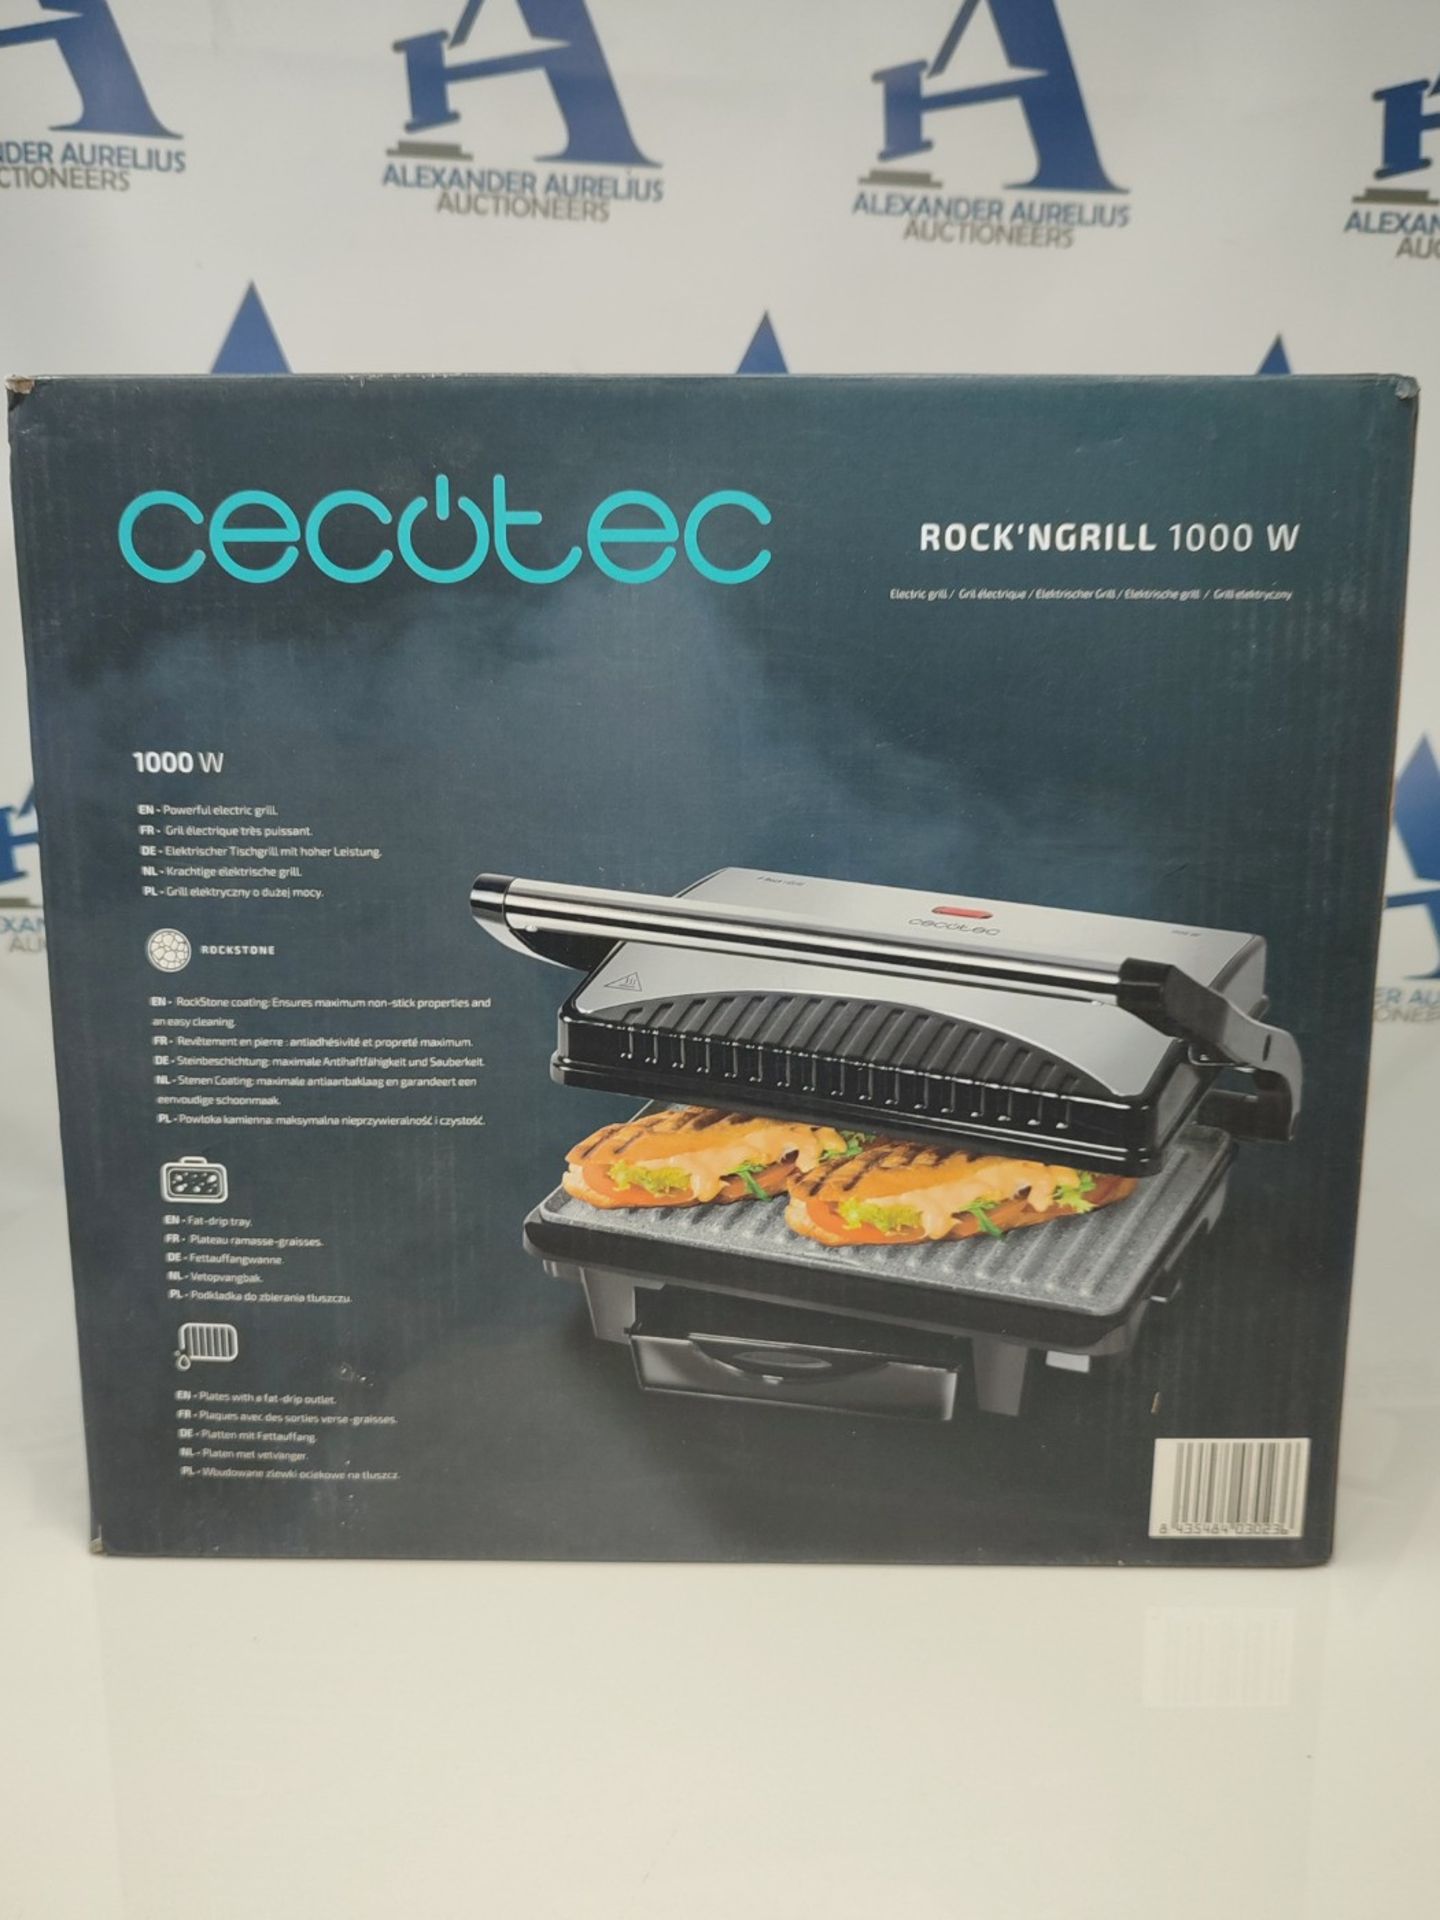 Cecotec Rock'nGrill 1000 Electric Grill. 1000 W, RockStone non-stick coating, Floating - Image 2 of 3